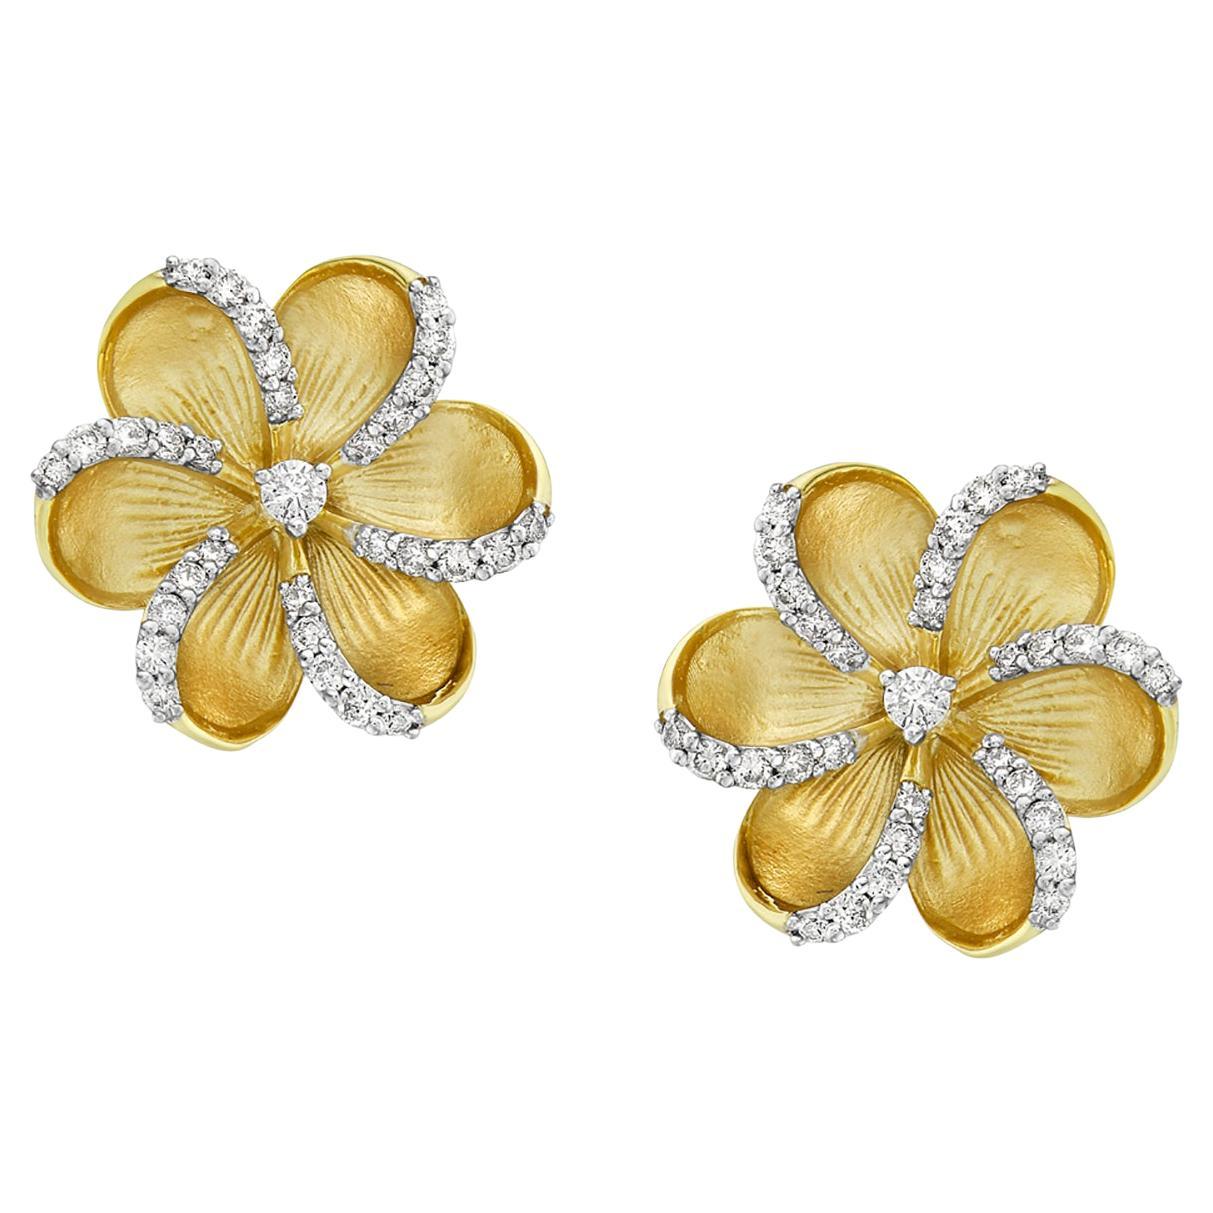 Narcissus Flower Shaped Carved Studs in 14k Yellow Gold Equipped with Diamonds